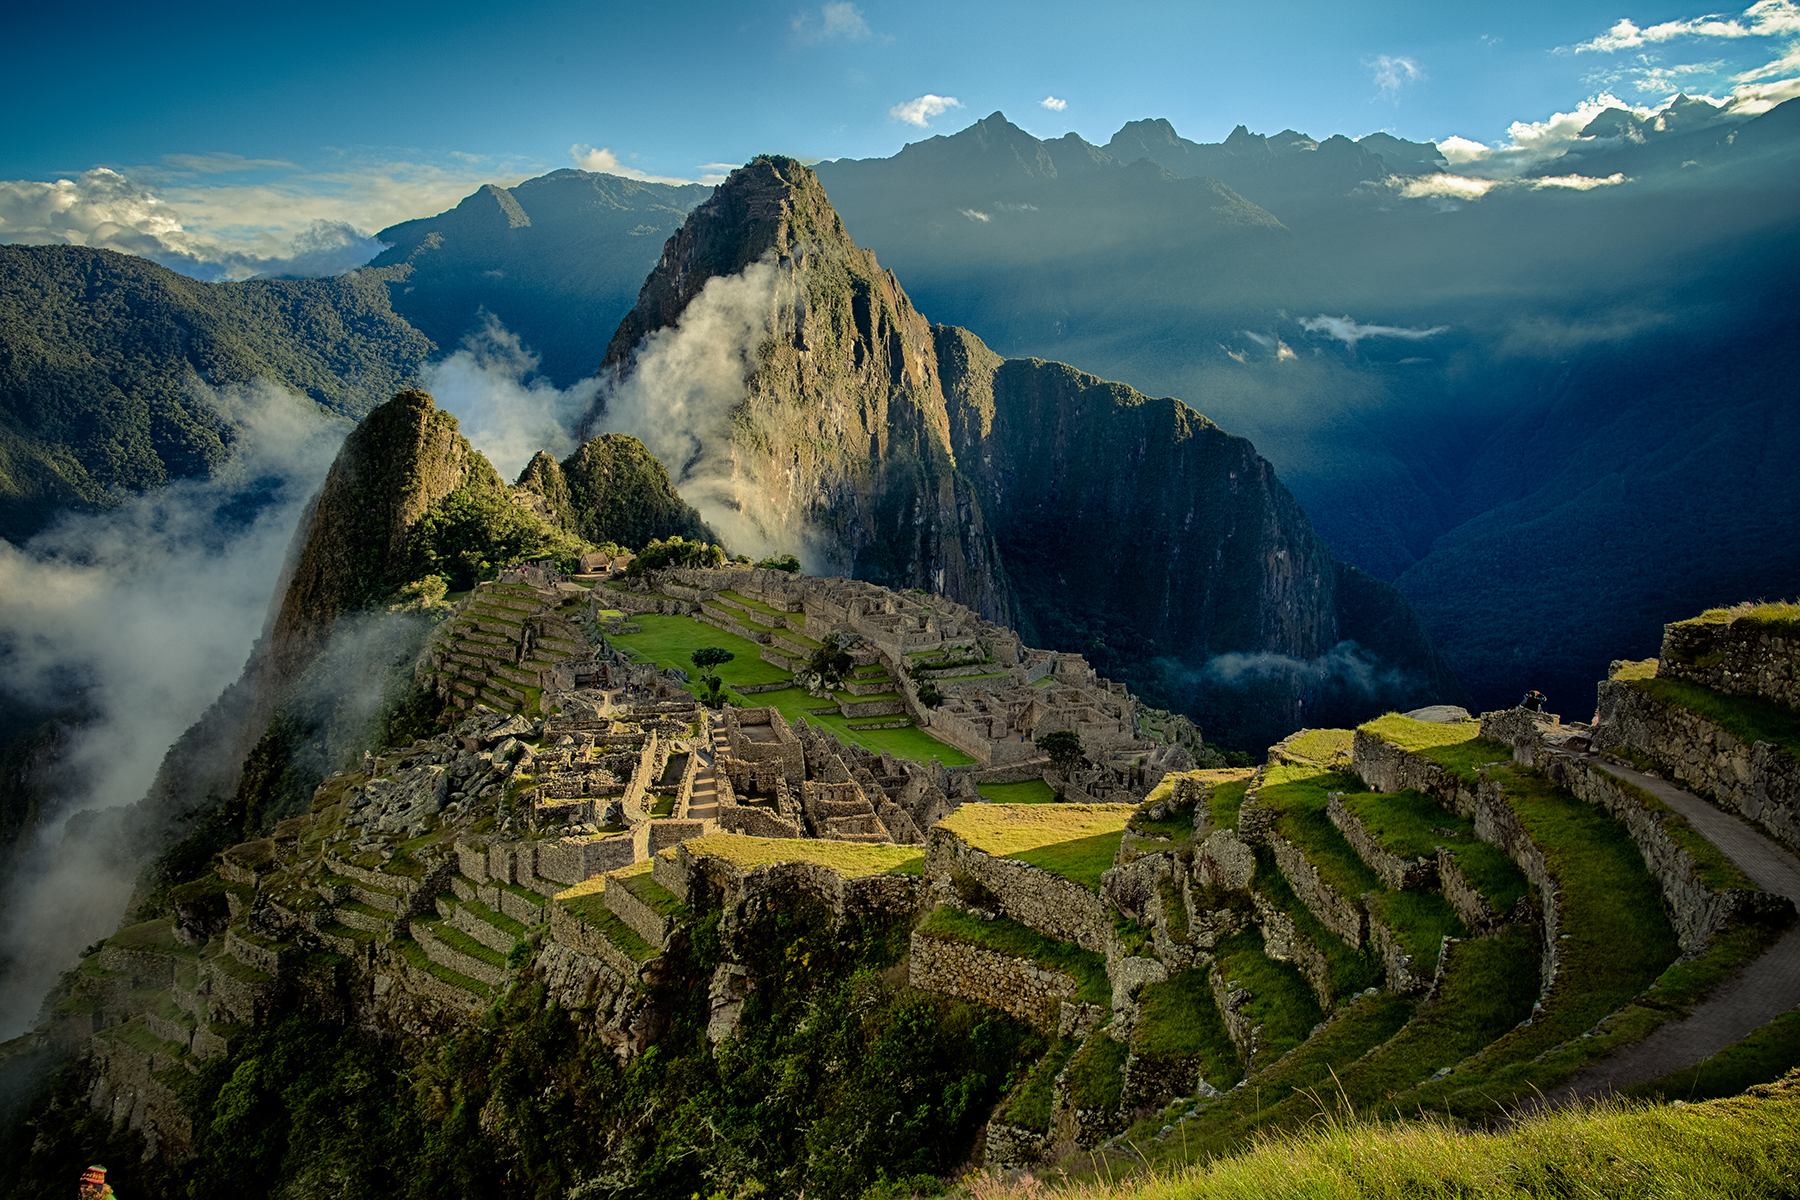 An aerial view of the citadel of Machu Picchu. Huyana Picchu rises above the clouds just beyond.